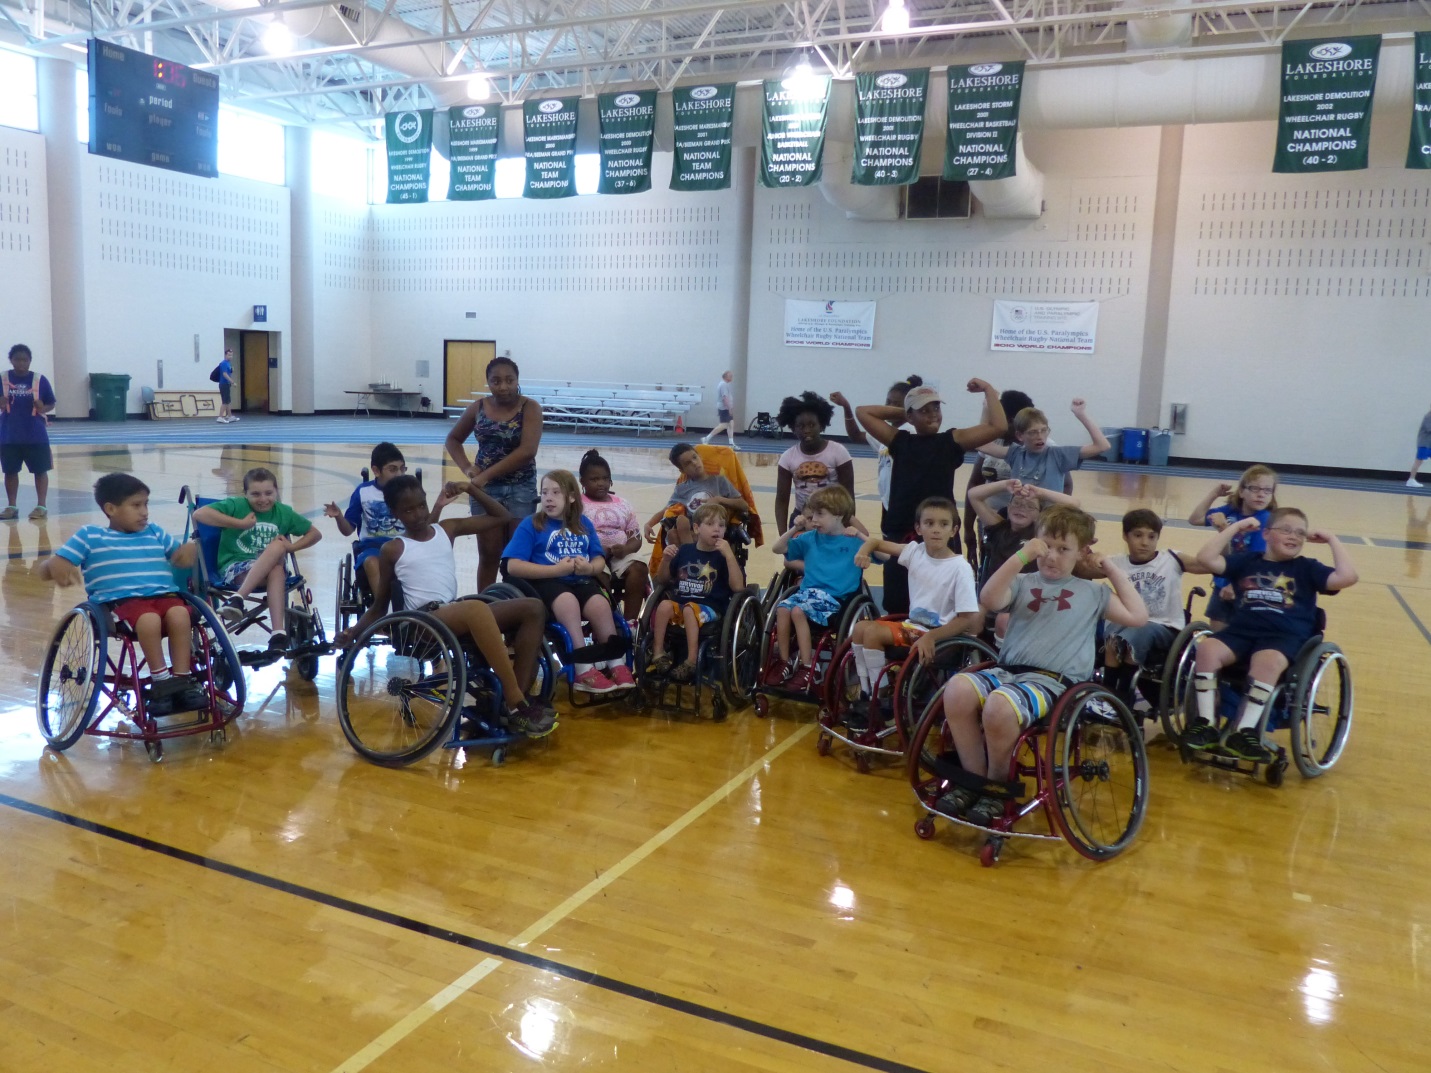 children with differing ability levels together in a gymnasium